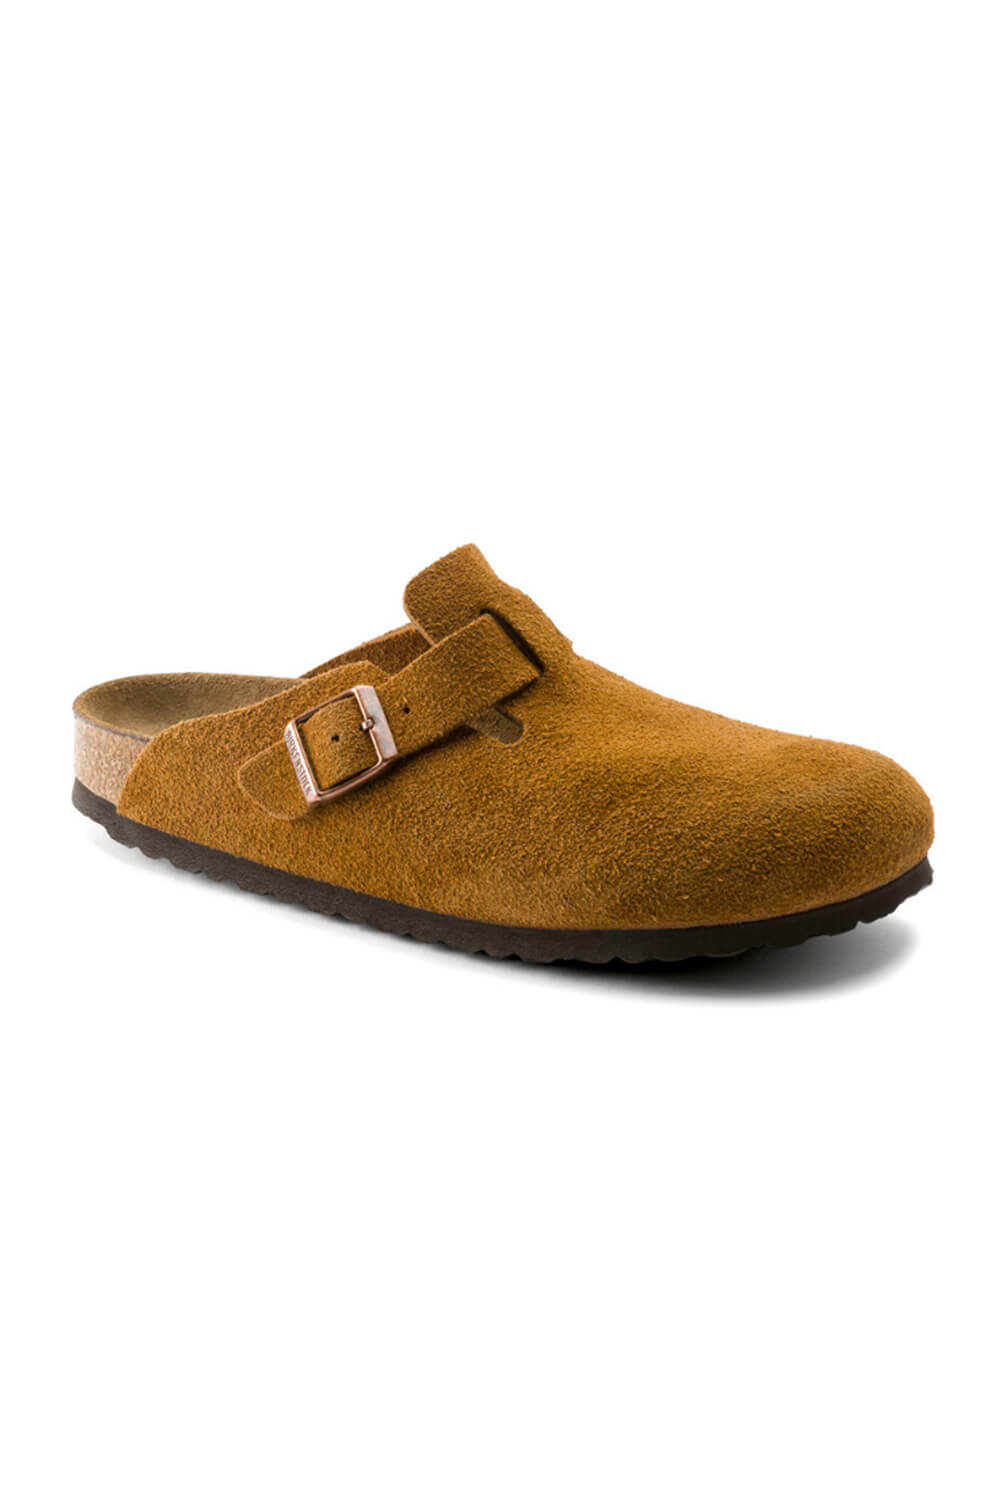 Birkenstock® Boston Leather Clog - Women's Shoes in Mink Natural